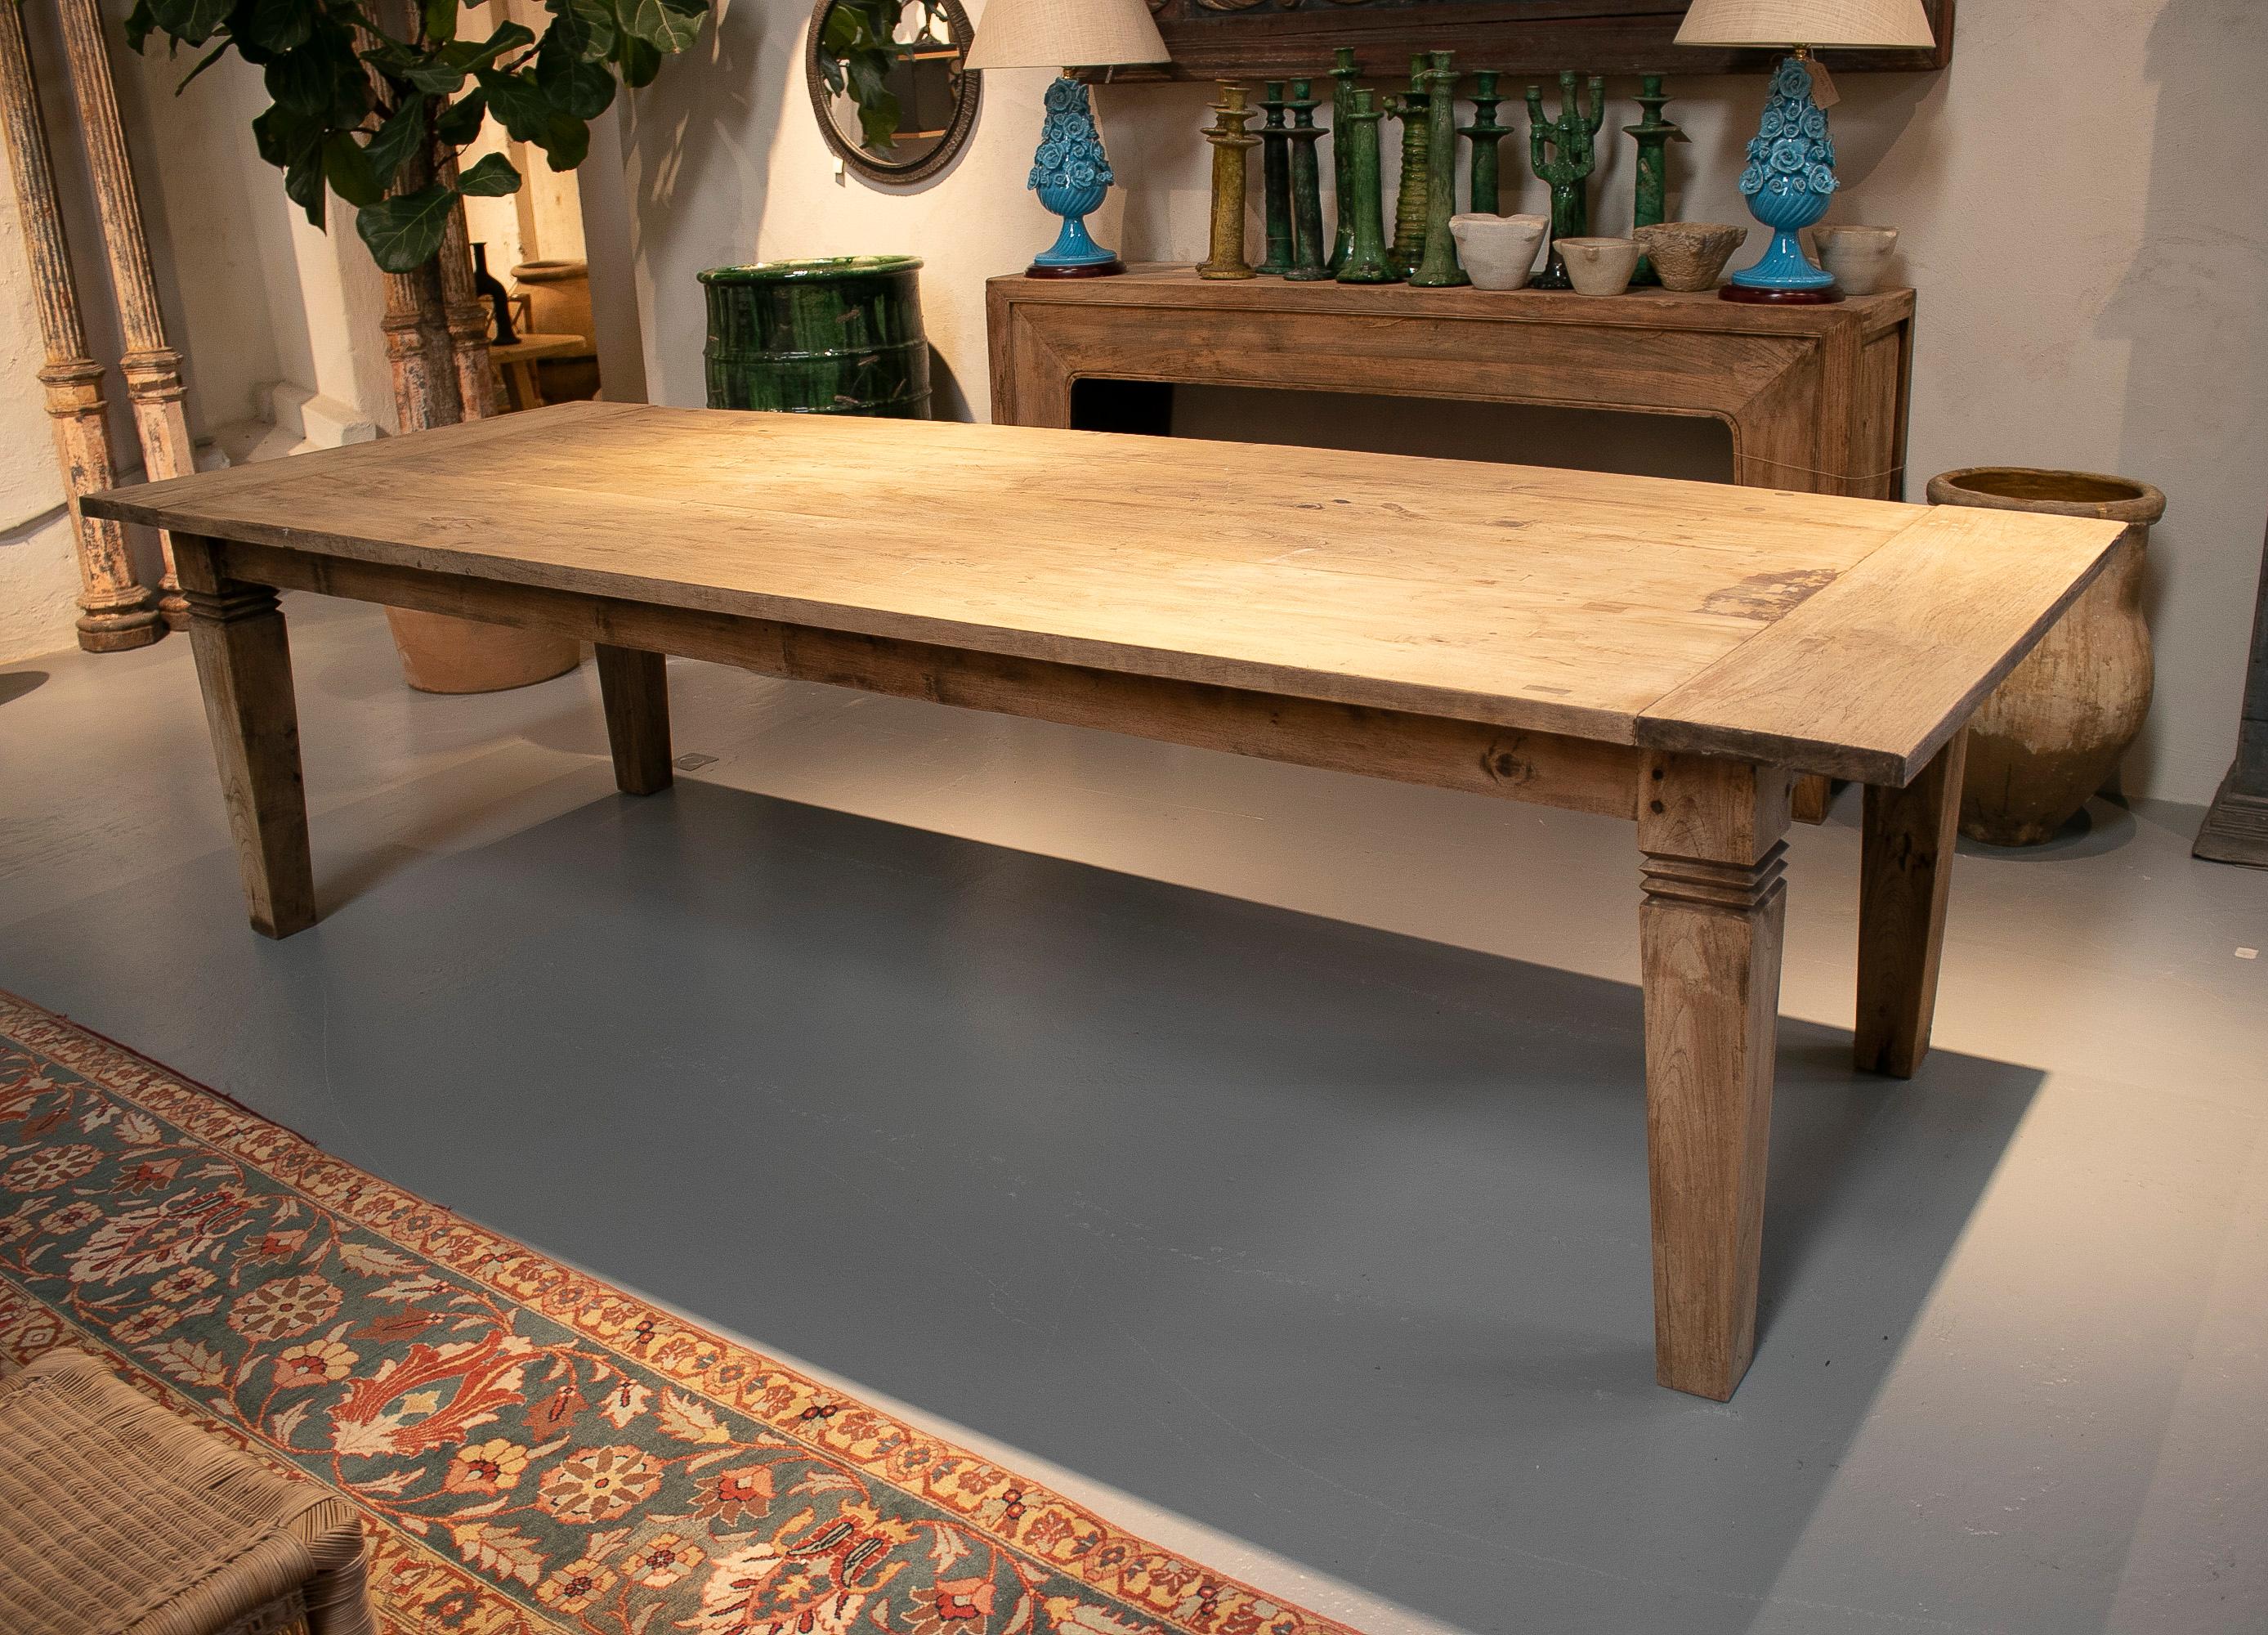 Rustic 1950s Spanish washed wood dining table.